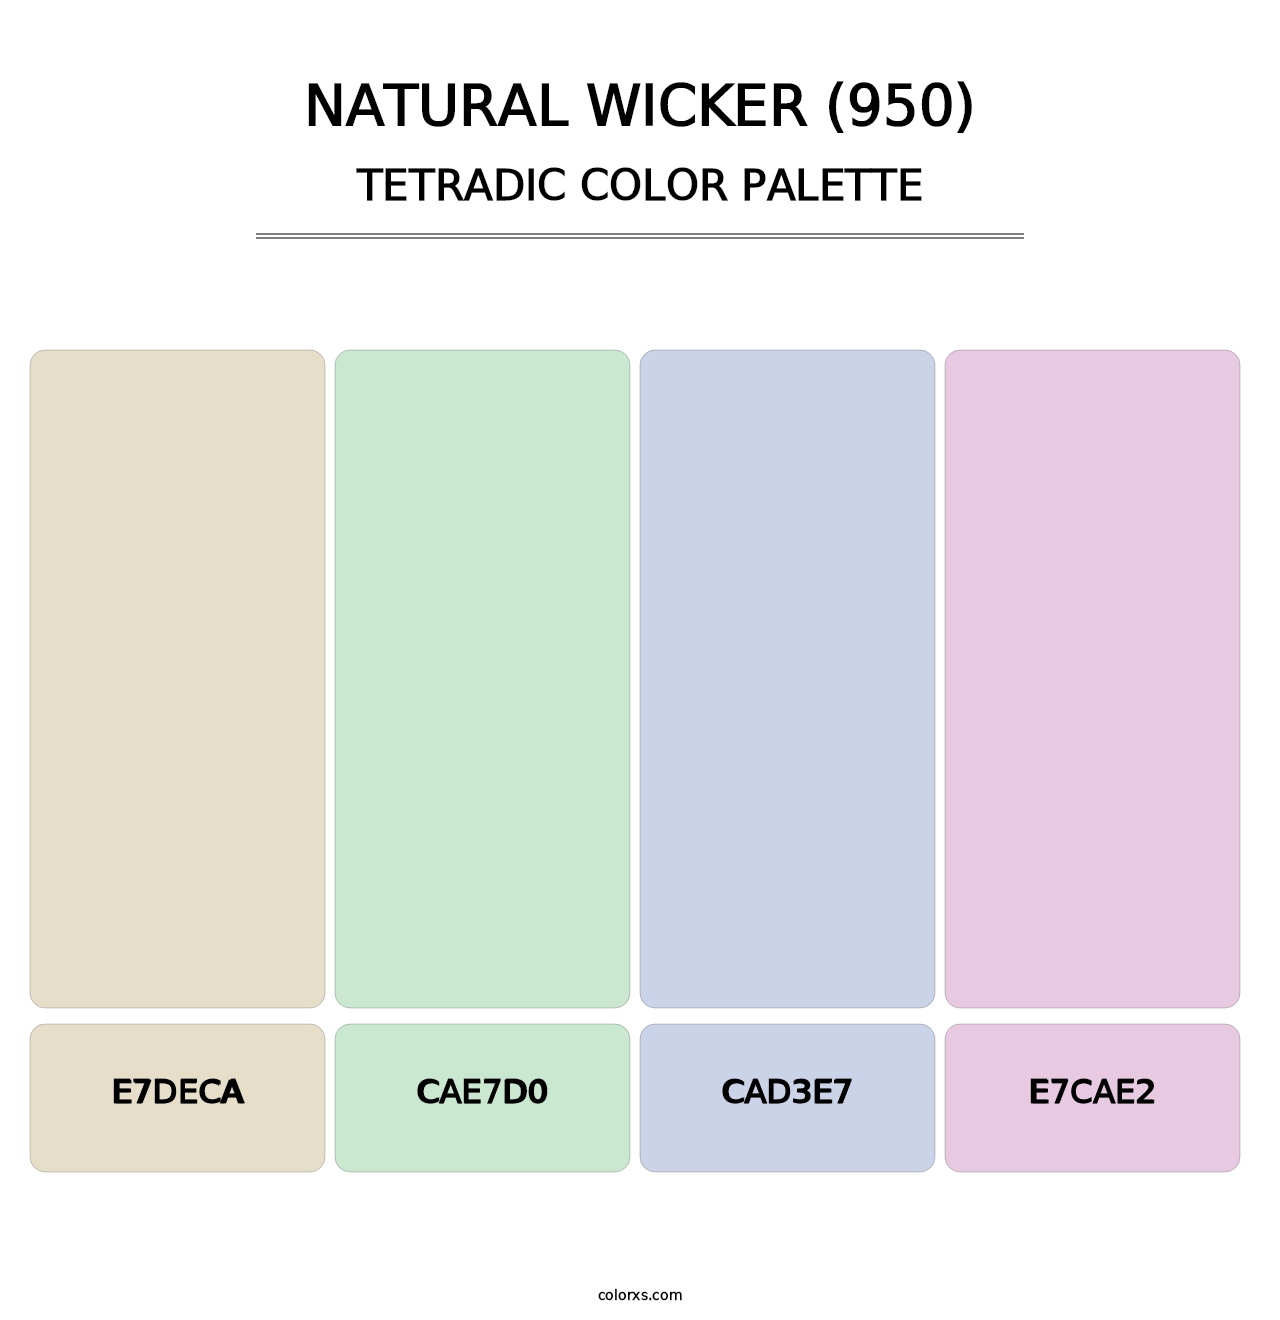 Natural Wicker (950) - Tetradic Color Palette